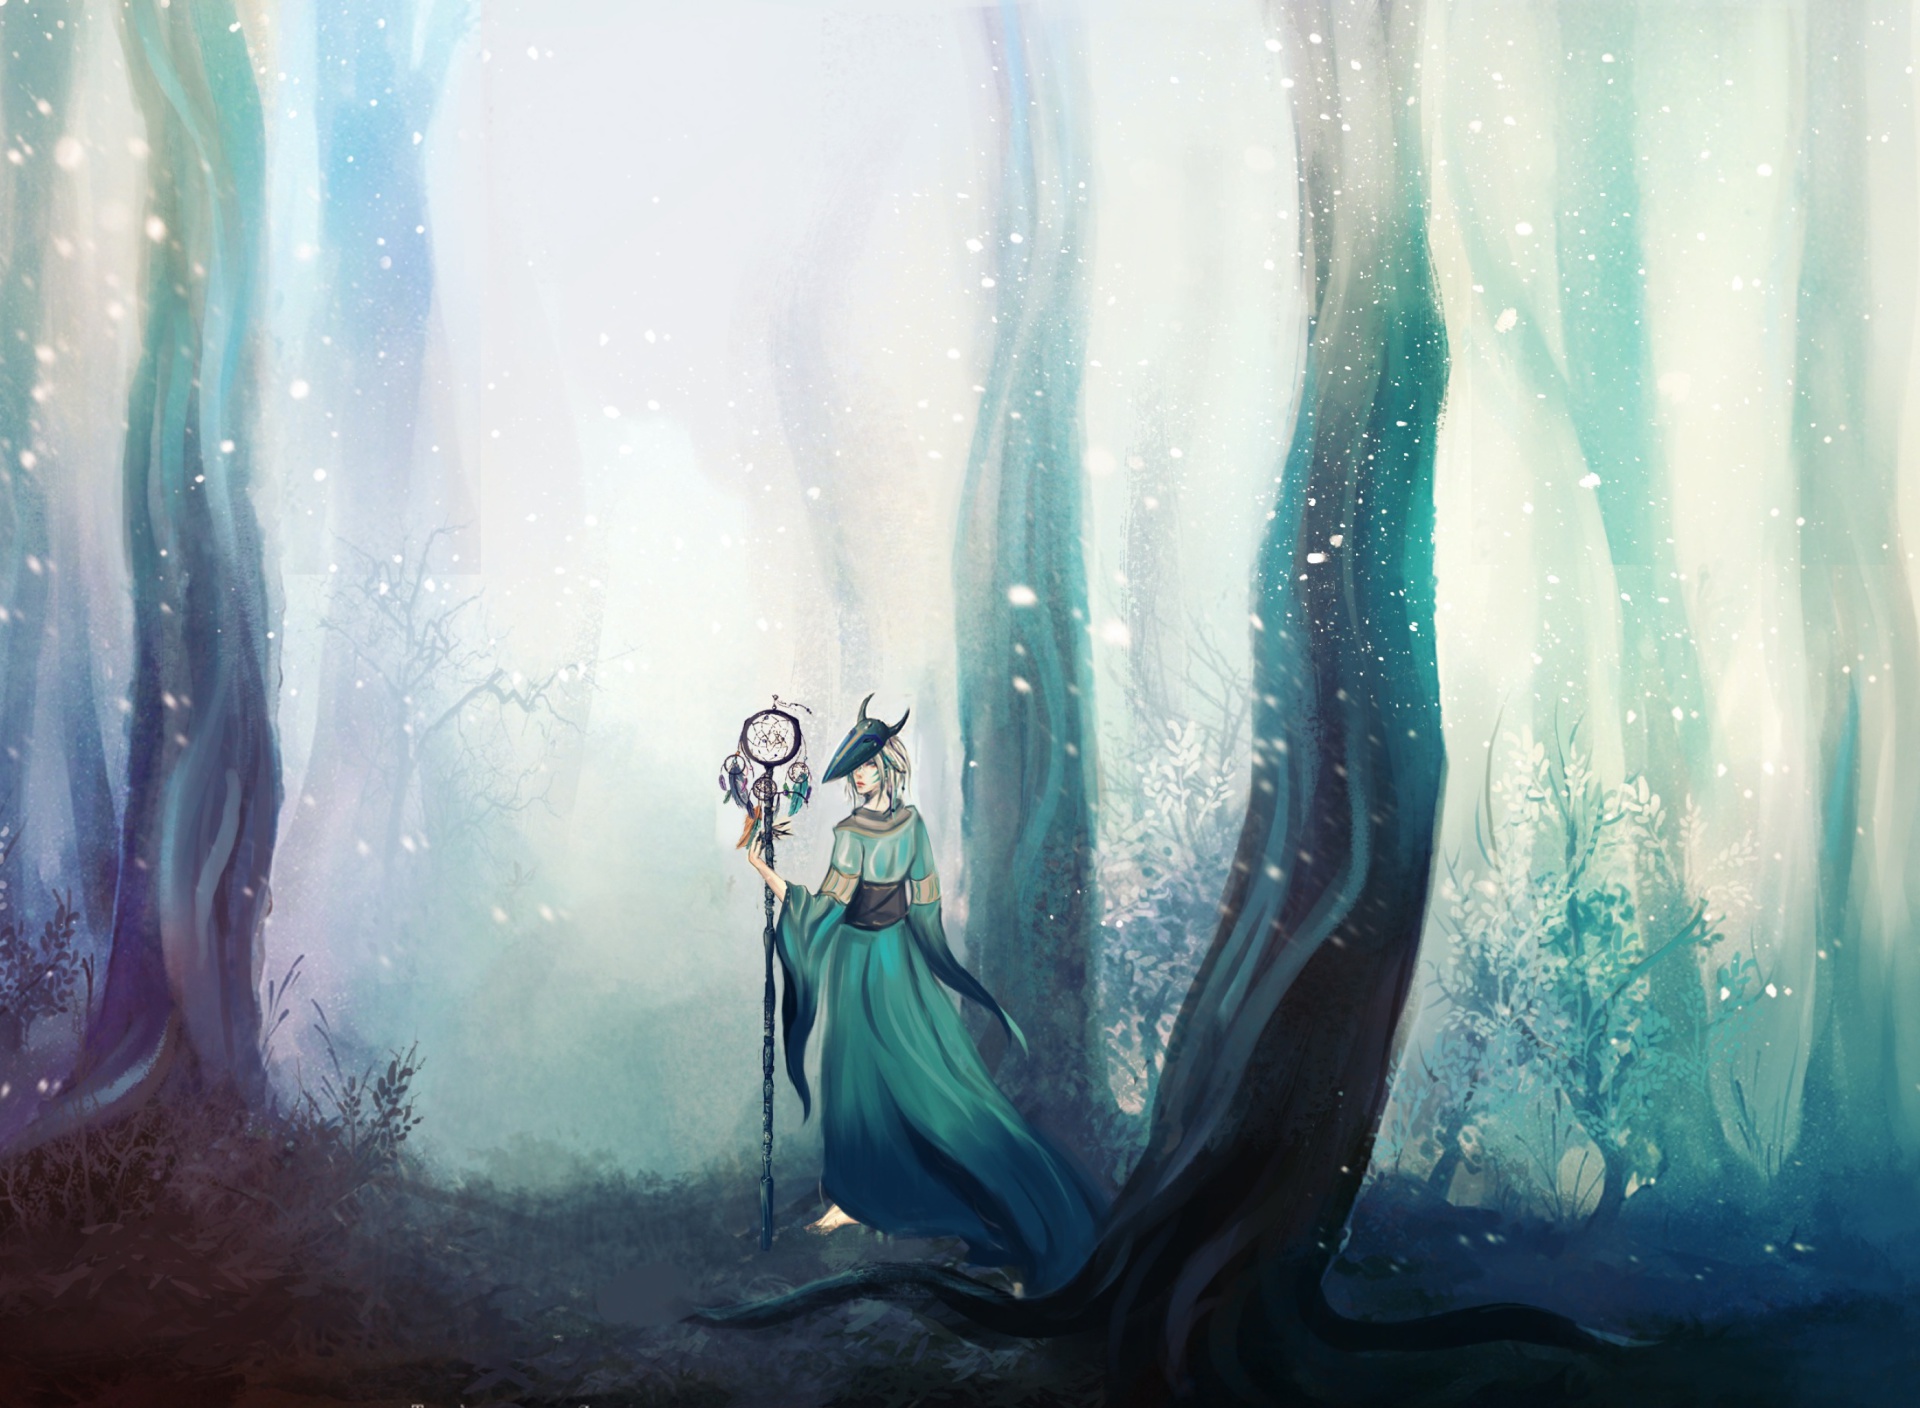 Fairy in Enchanted forest screenshot #1 1920x1408